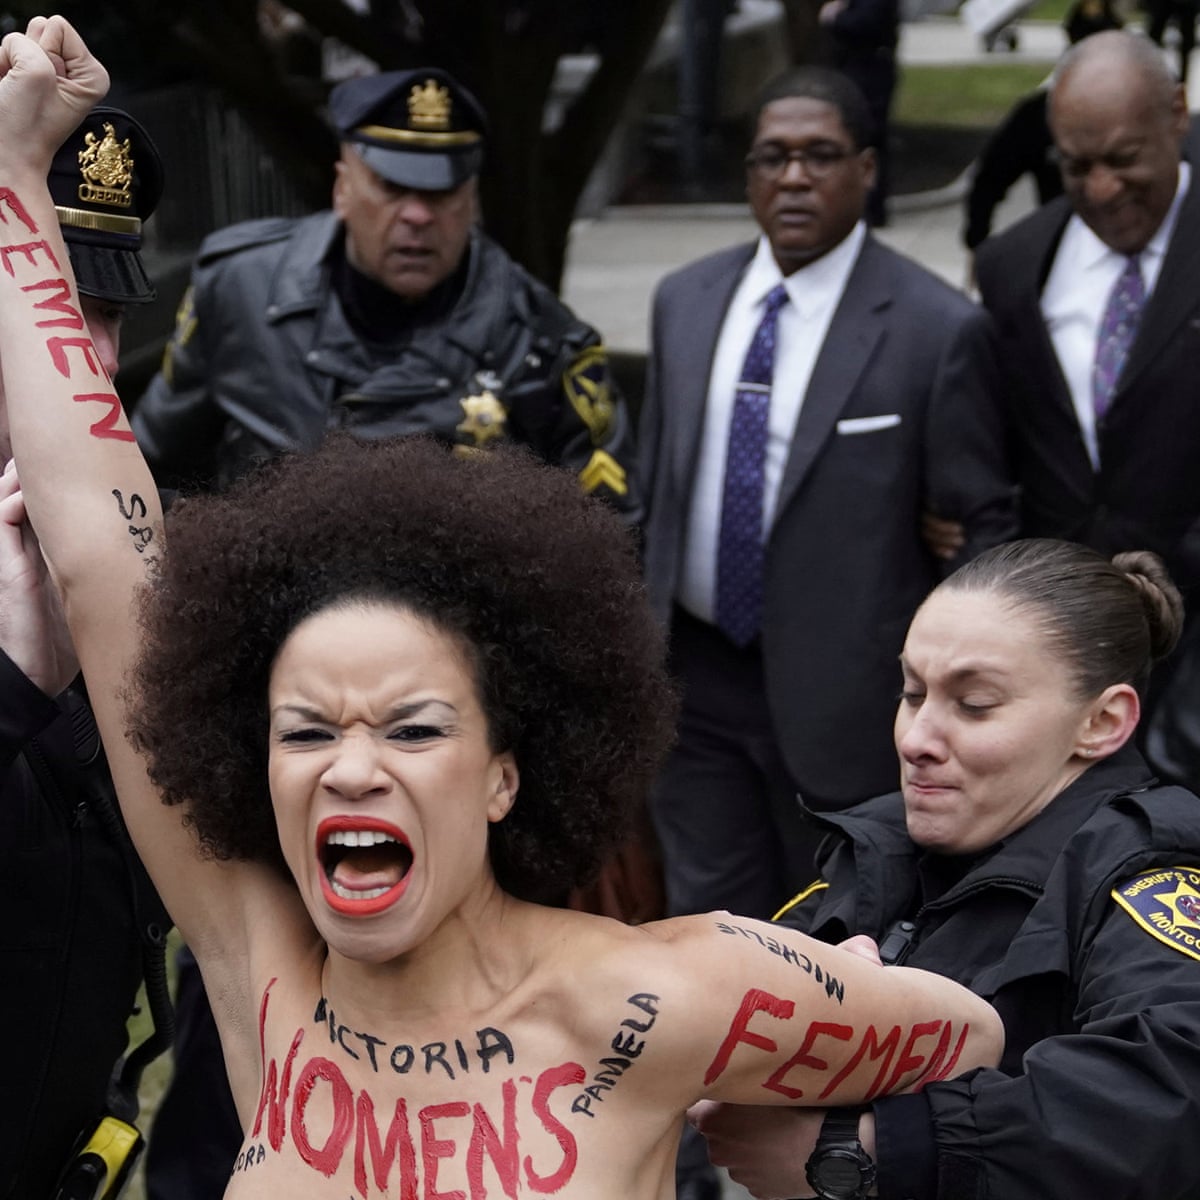 Uncensored nicolle rochelle Topless Protester